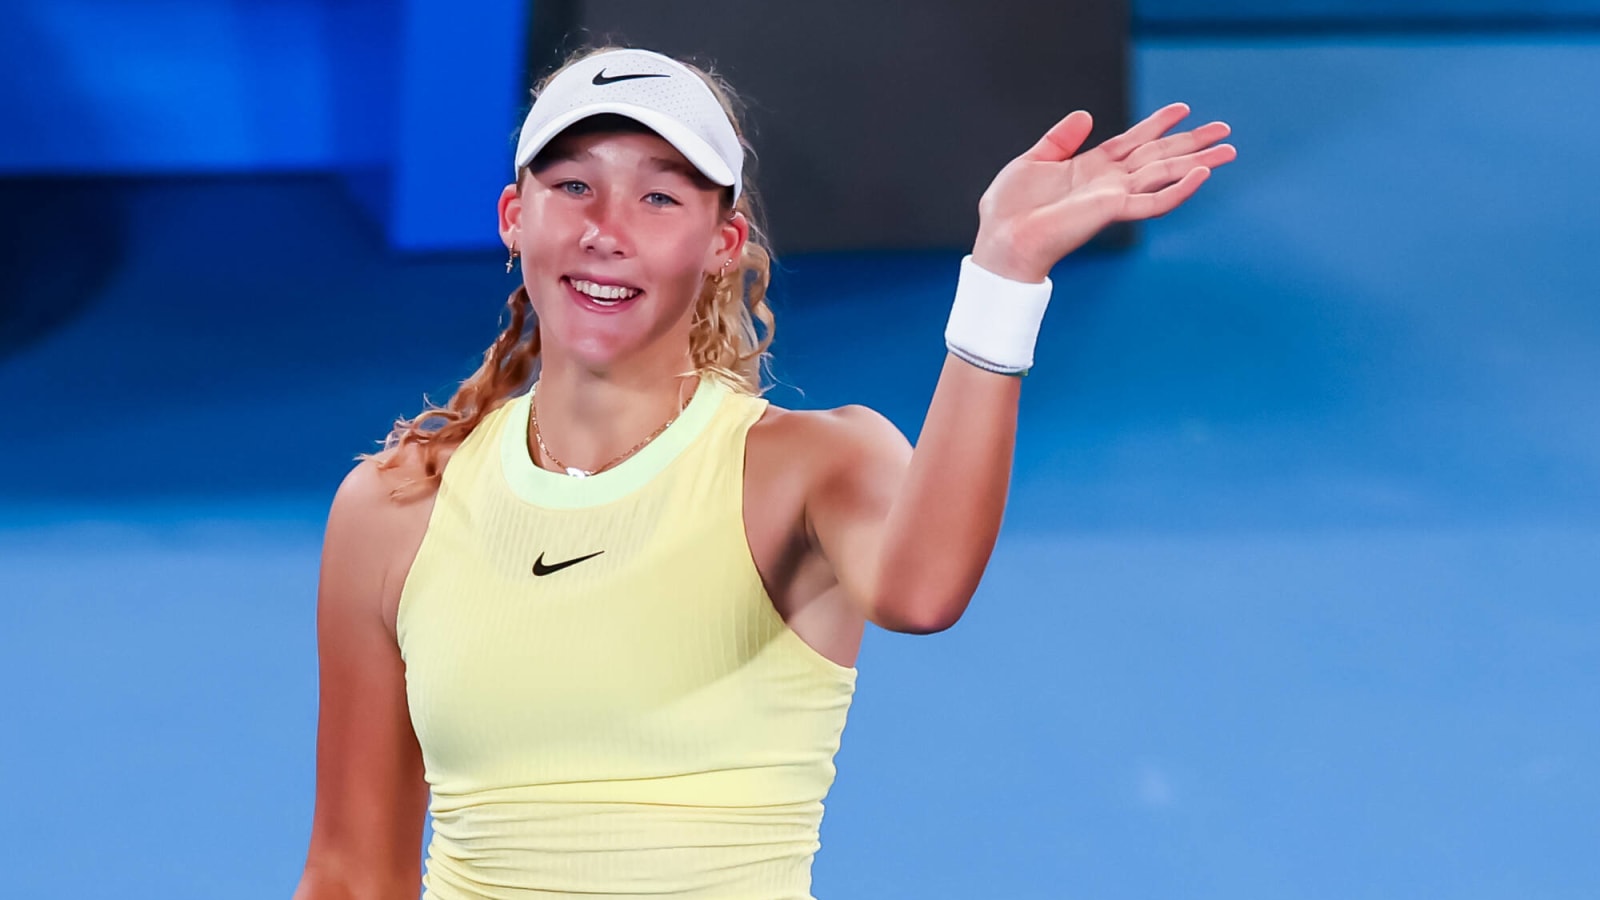 'I will put it in a frame,' Teen star Mirra Andreeva gushes on after reading Andy Murray’s heartfelt message on her massive win at the Australian Open